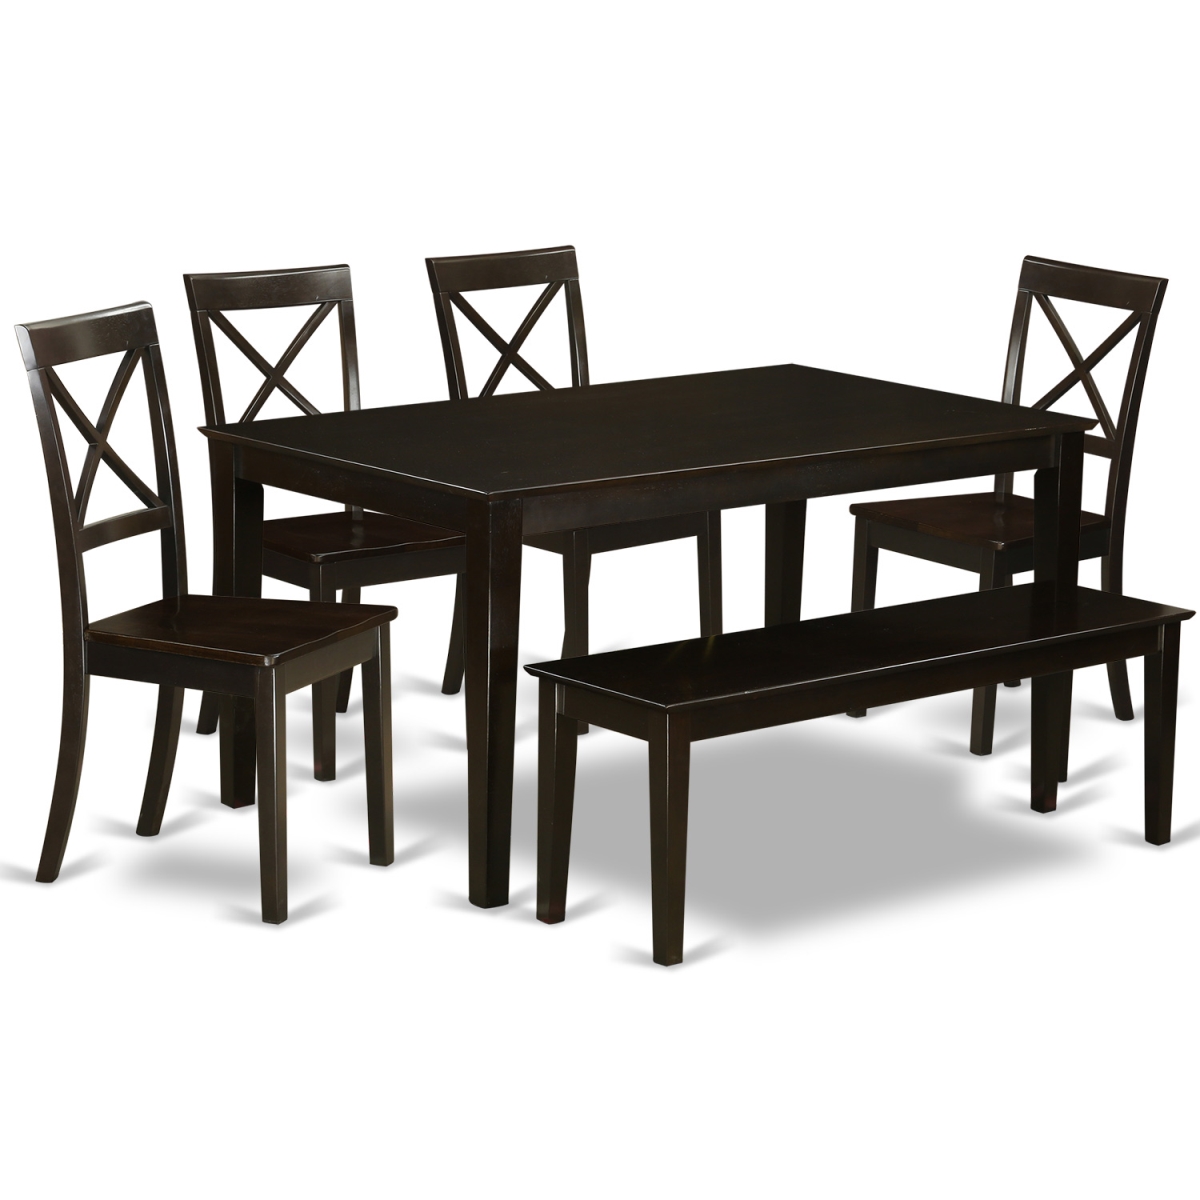 Picture of East West Furniture CABO6S-CAP-W Dining Room Table Set - Kitchen Table & 4 Chairs & 1 Benches - 6 Piece